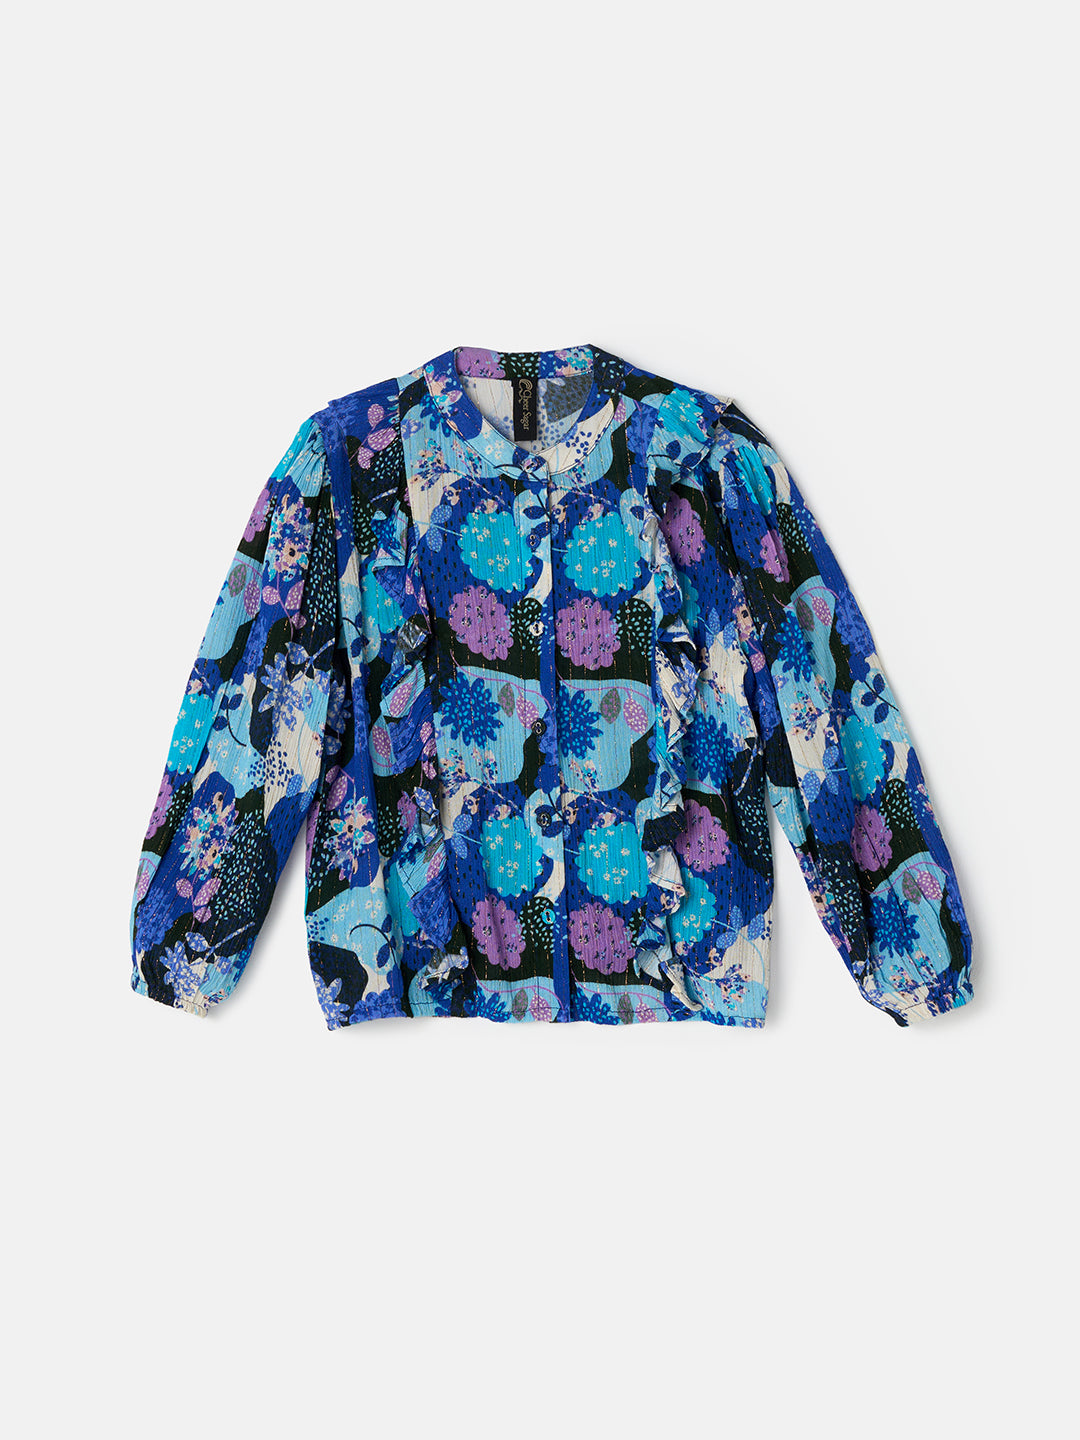 Girls Floral Printed Frill Woven Blue Top